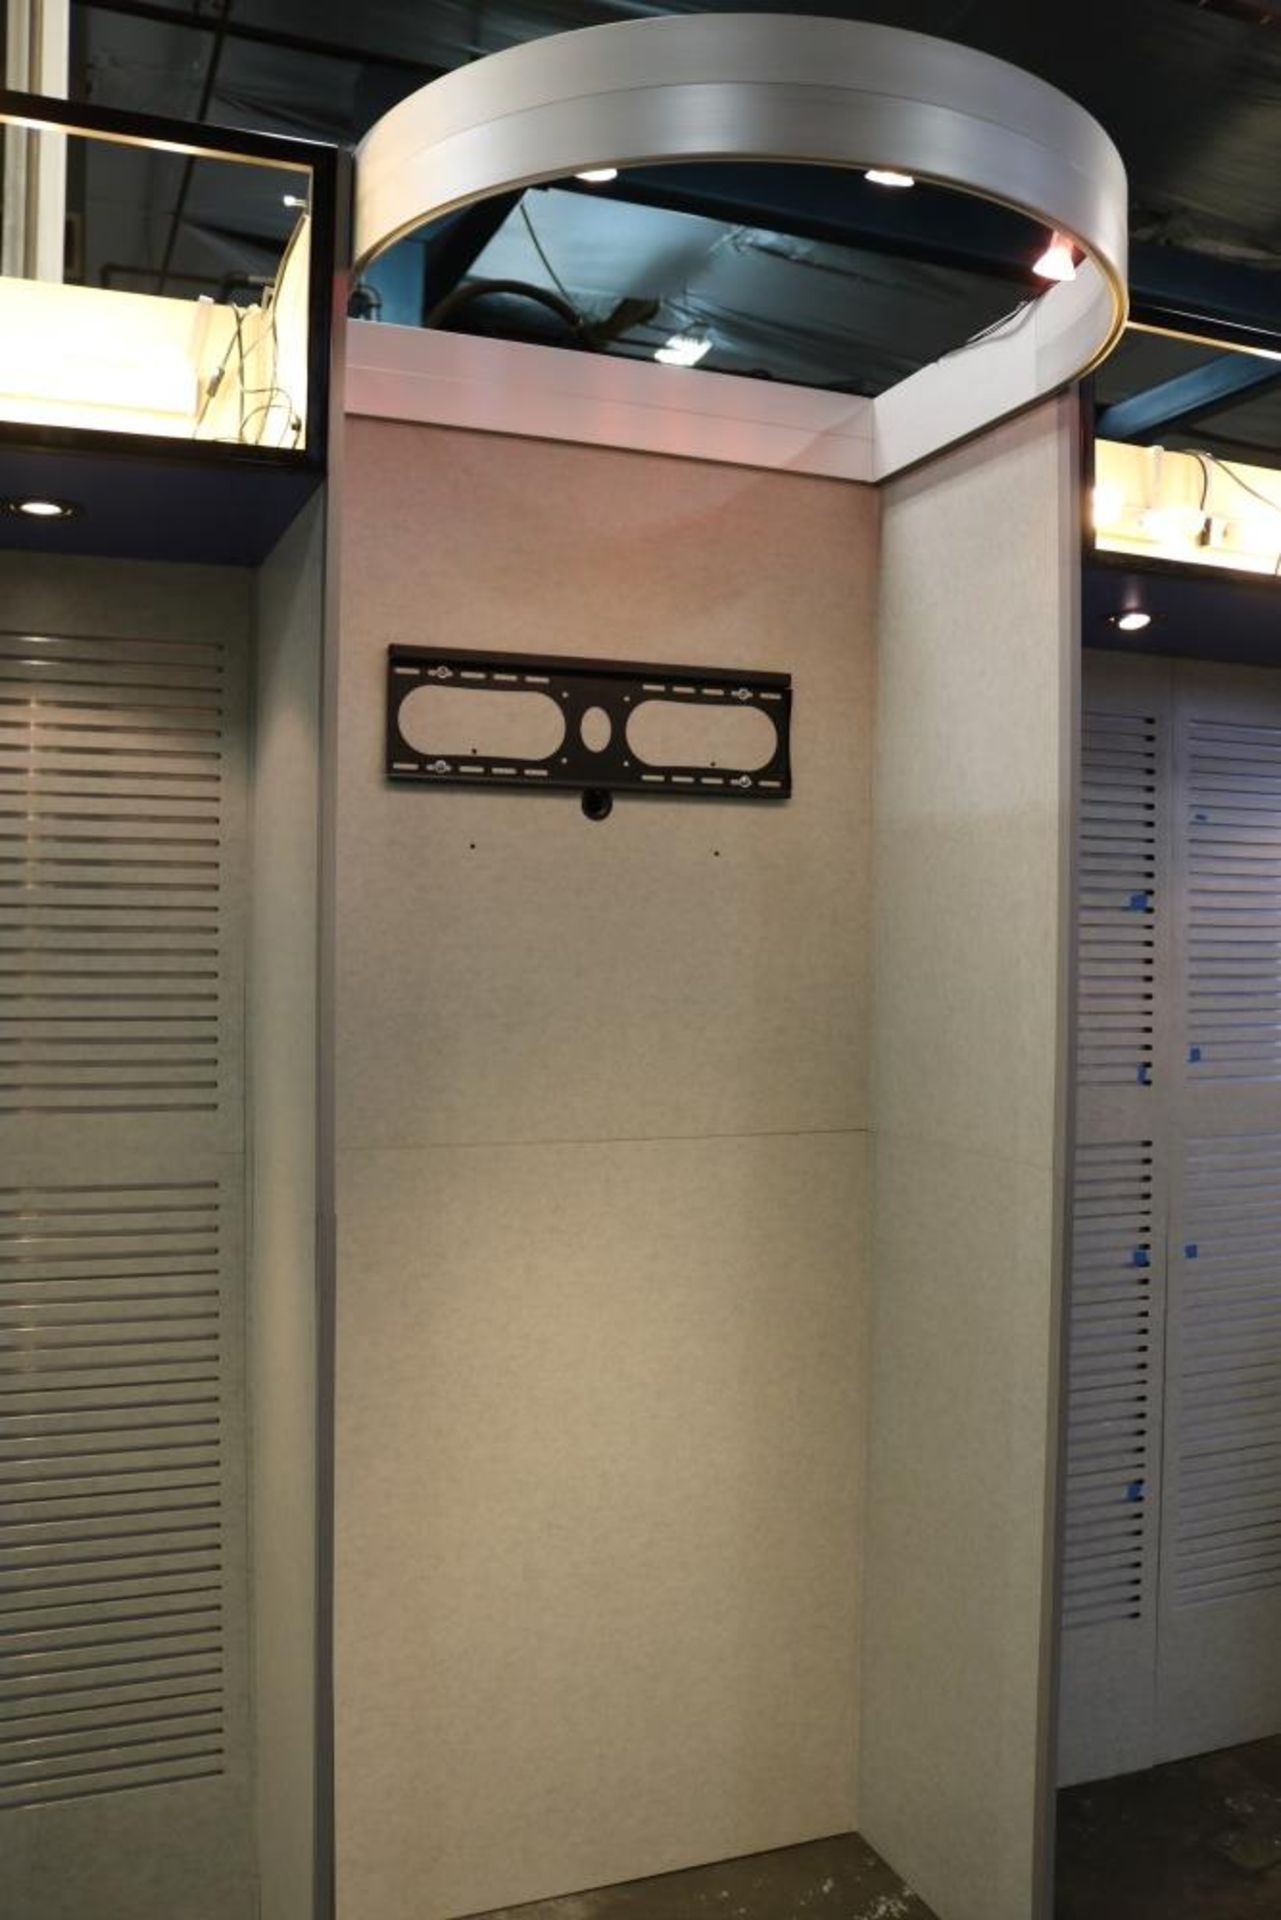 20FT, Trade Show Display Booth, With Lighting, TV Mount, Modulure Shelving, Plastic Riser Display - Image 8 of 15